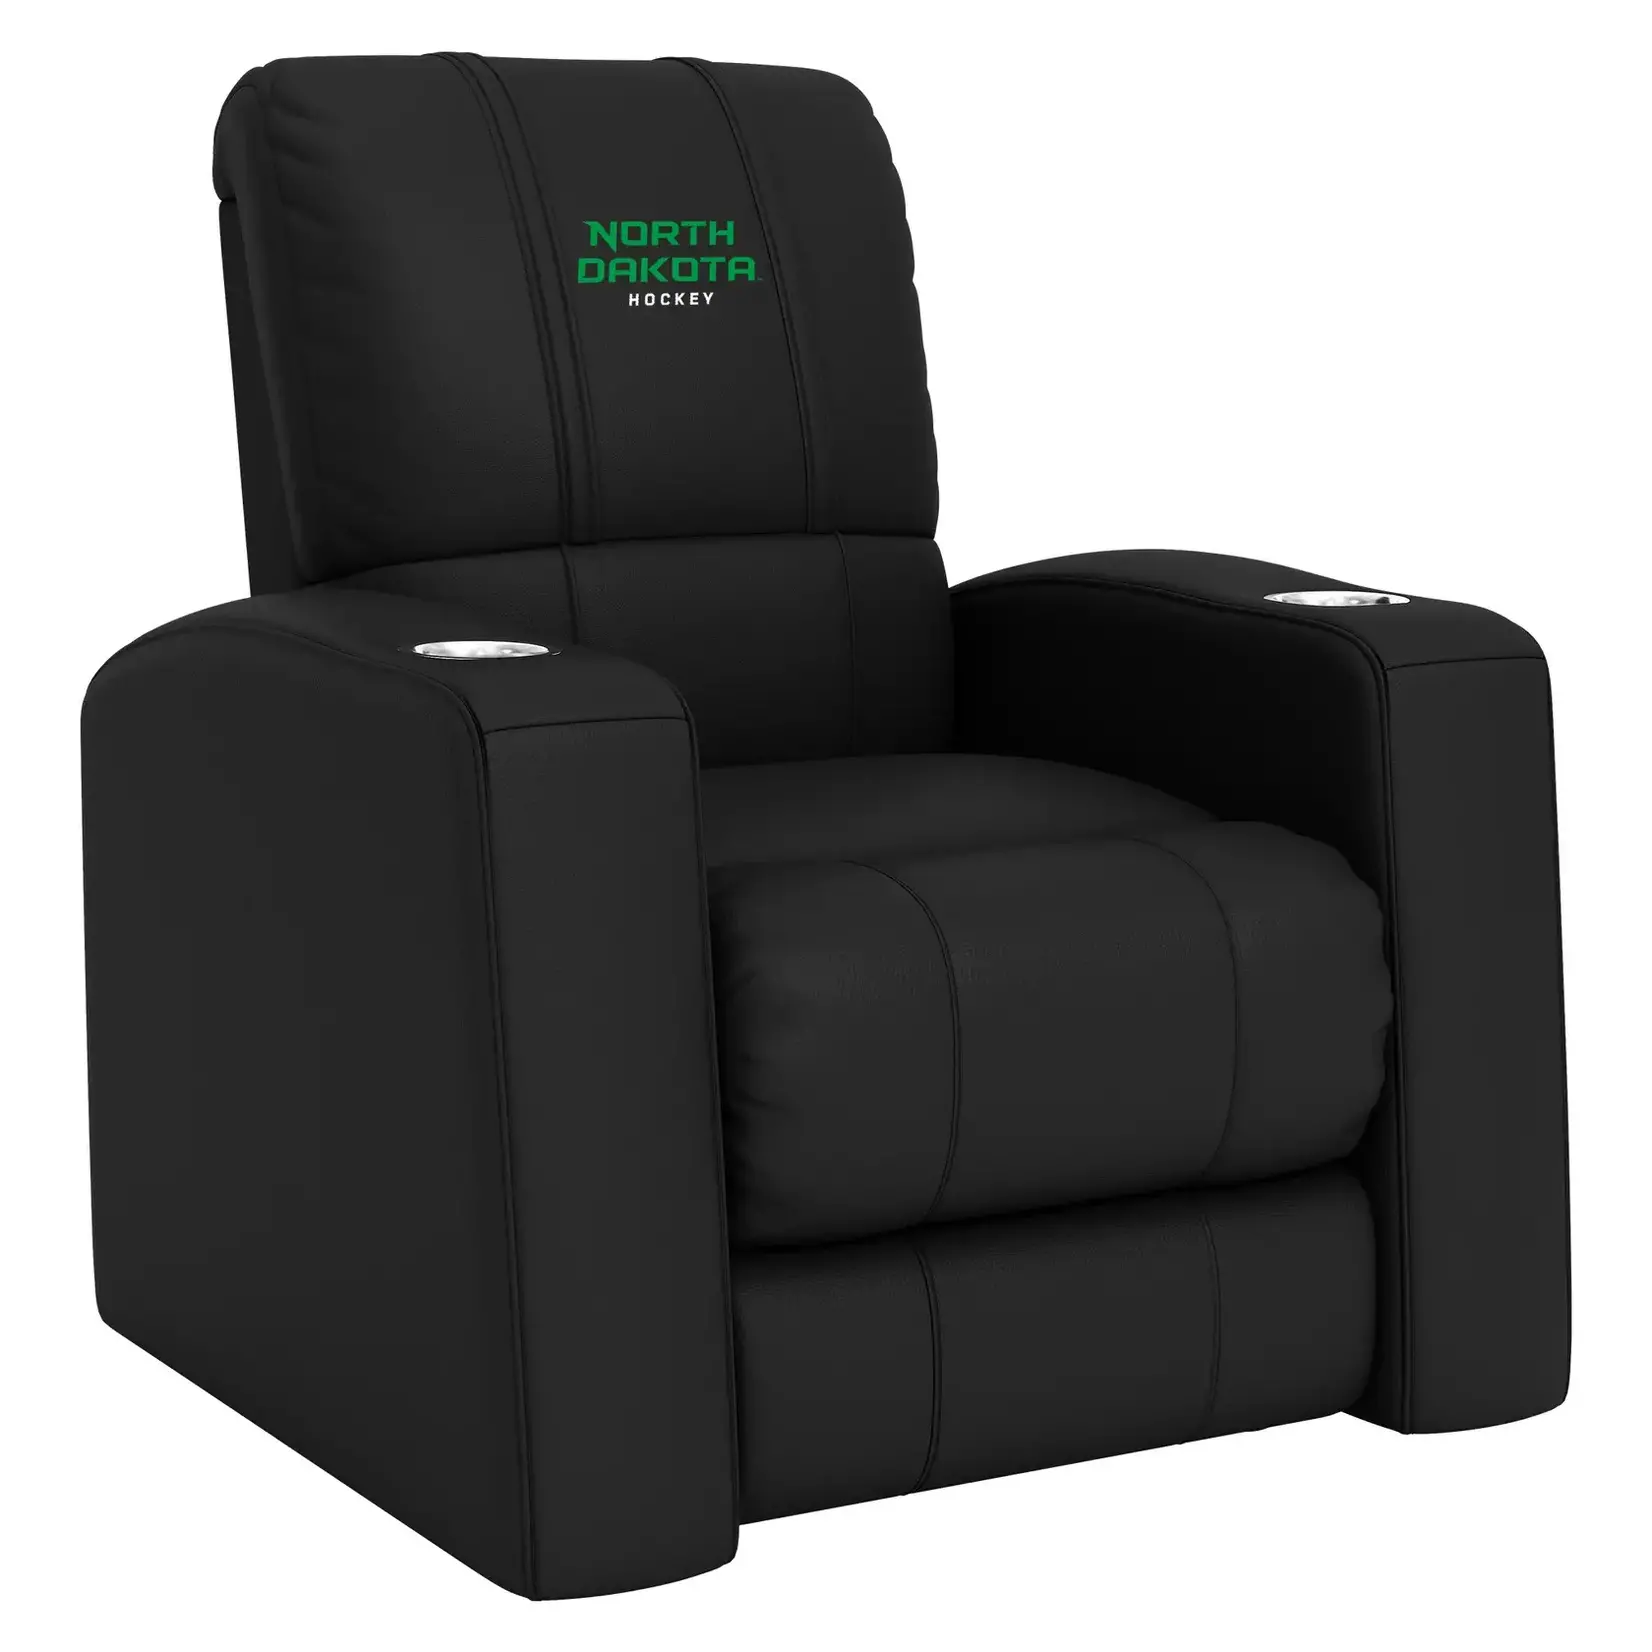 DreamSeat Relax Home Theater Recliner